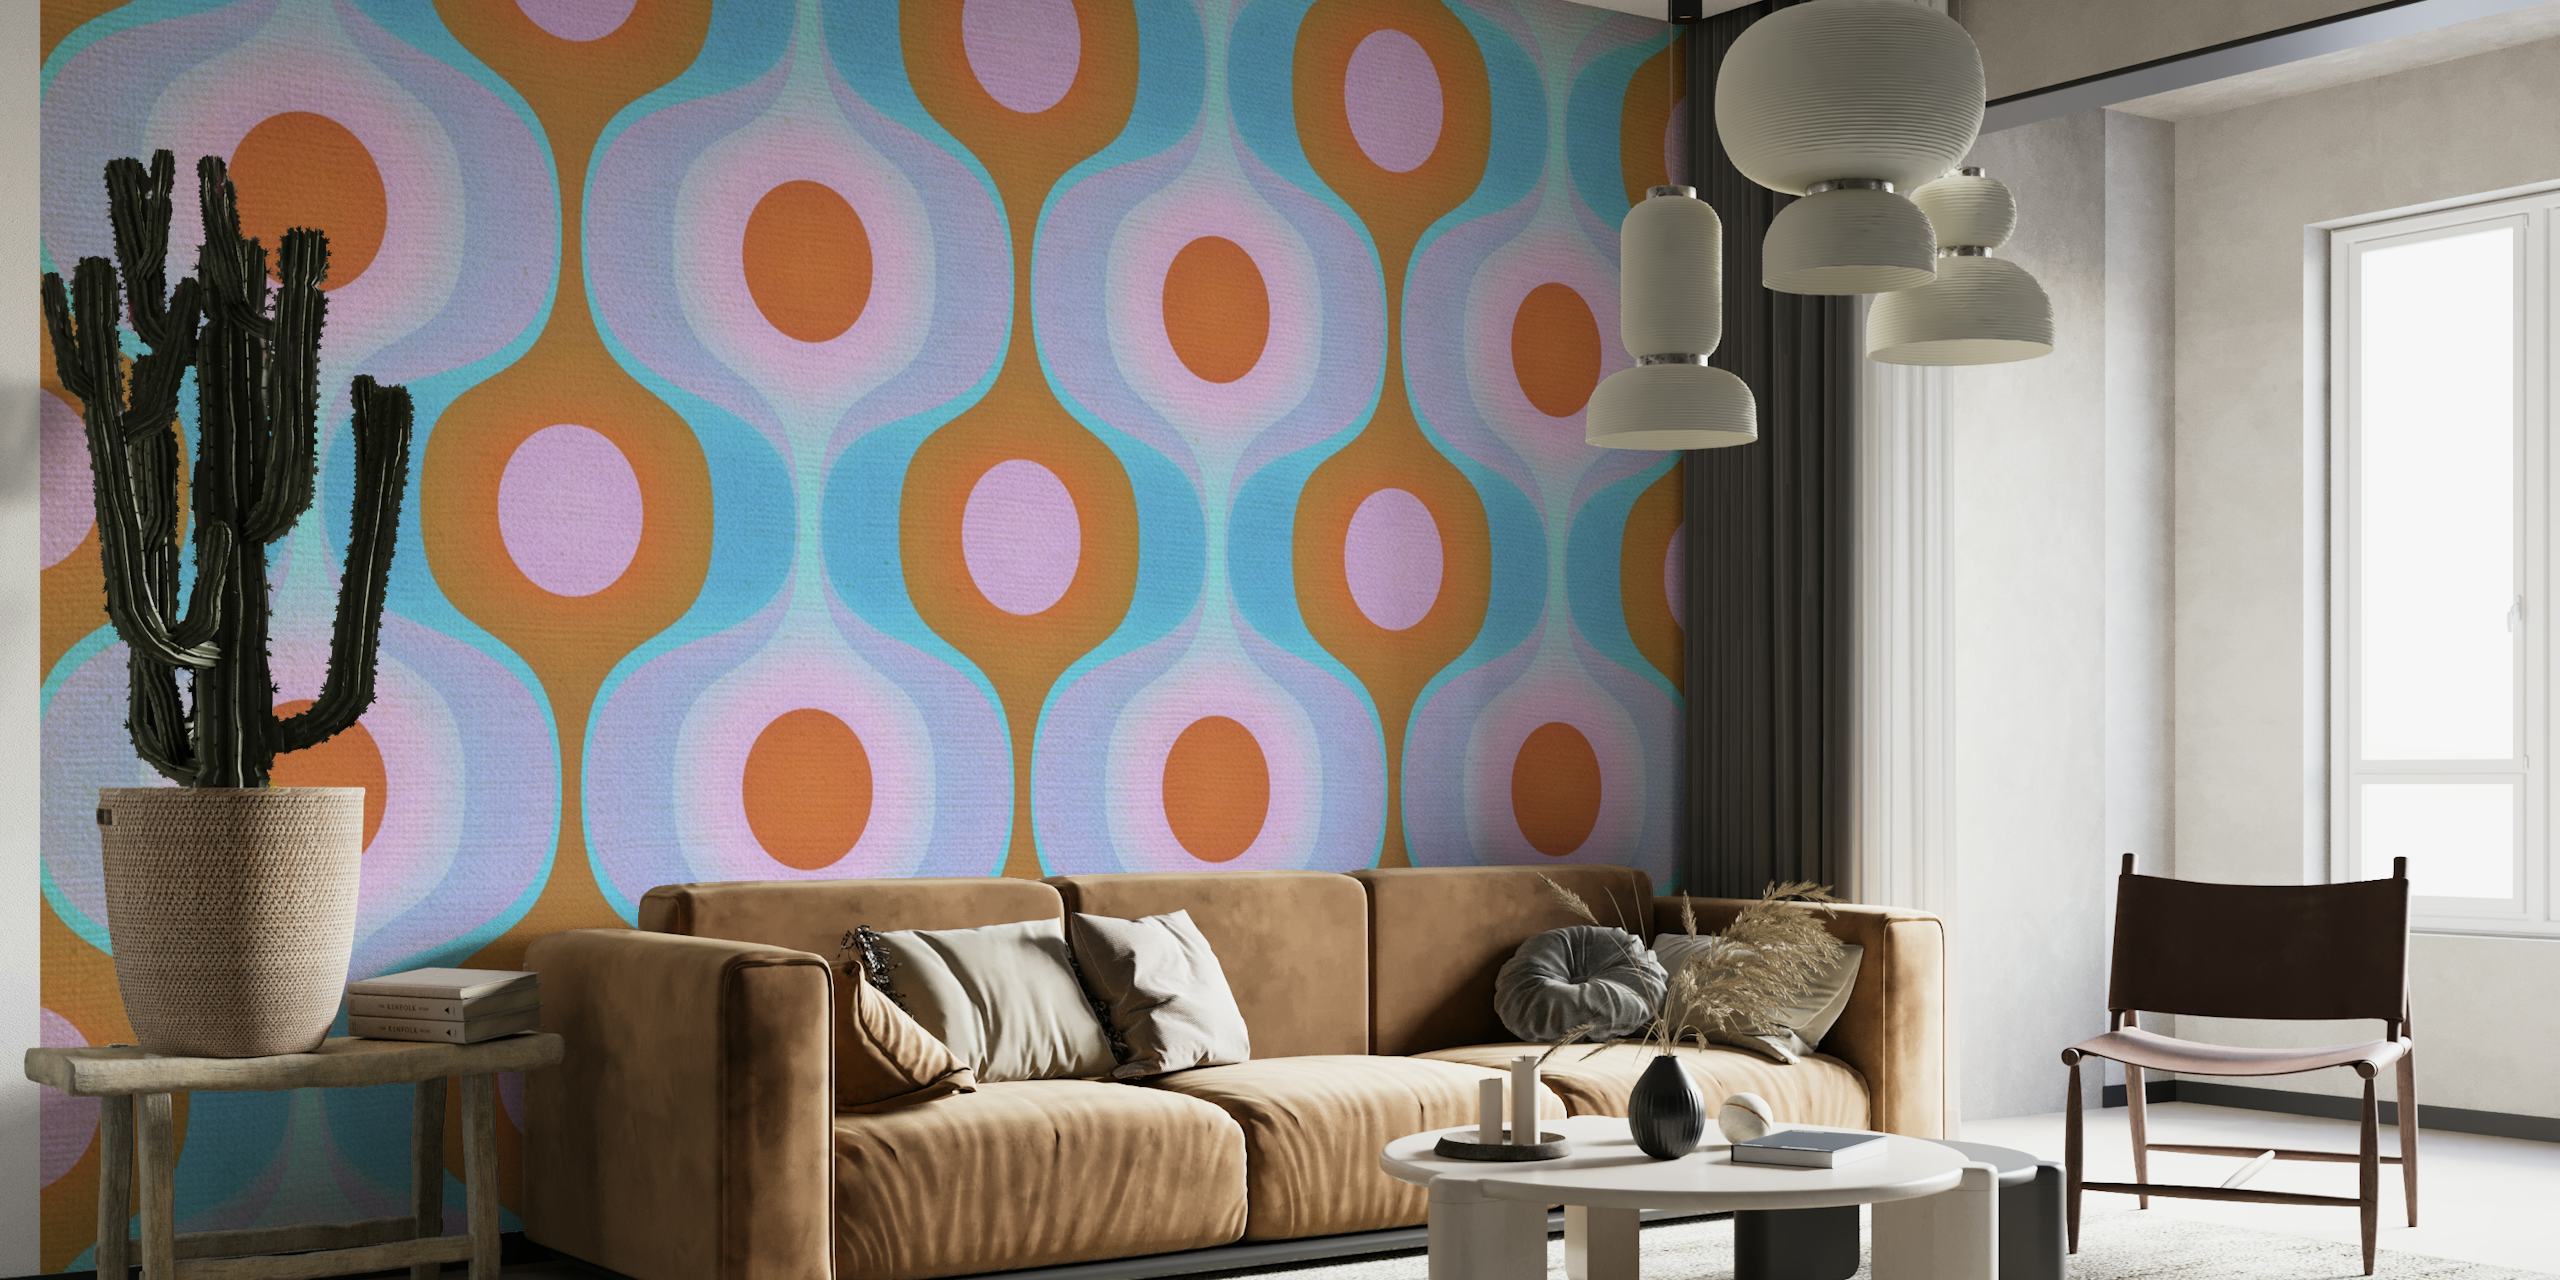 Mid Century Retro Vivid wall mural with geometric patterns in teal, orange, and white